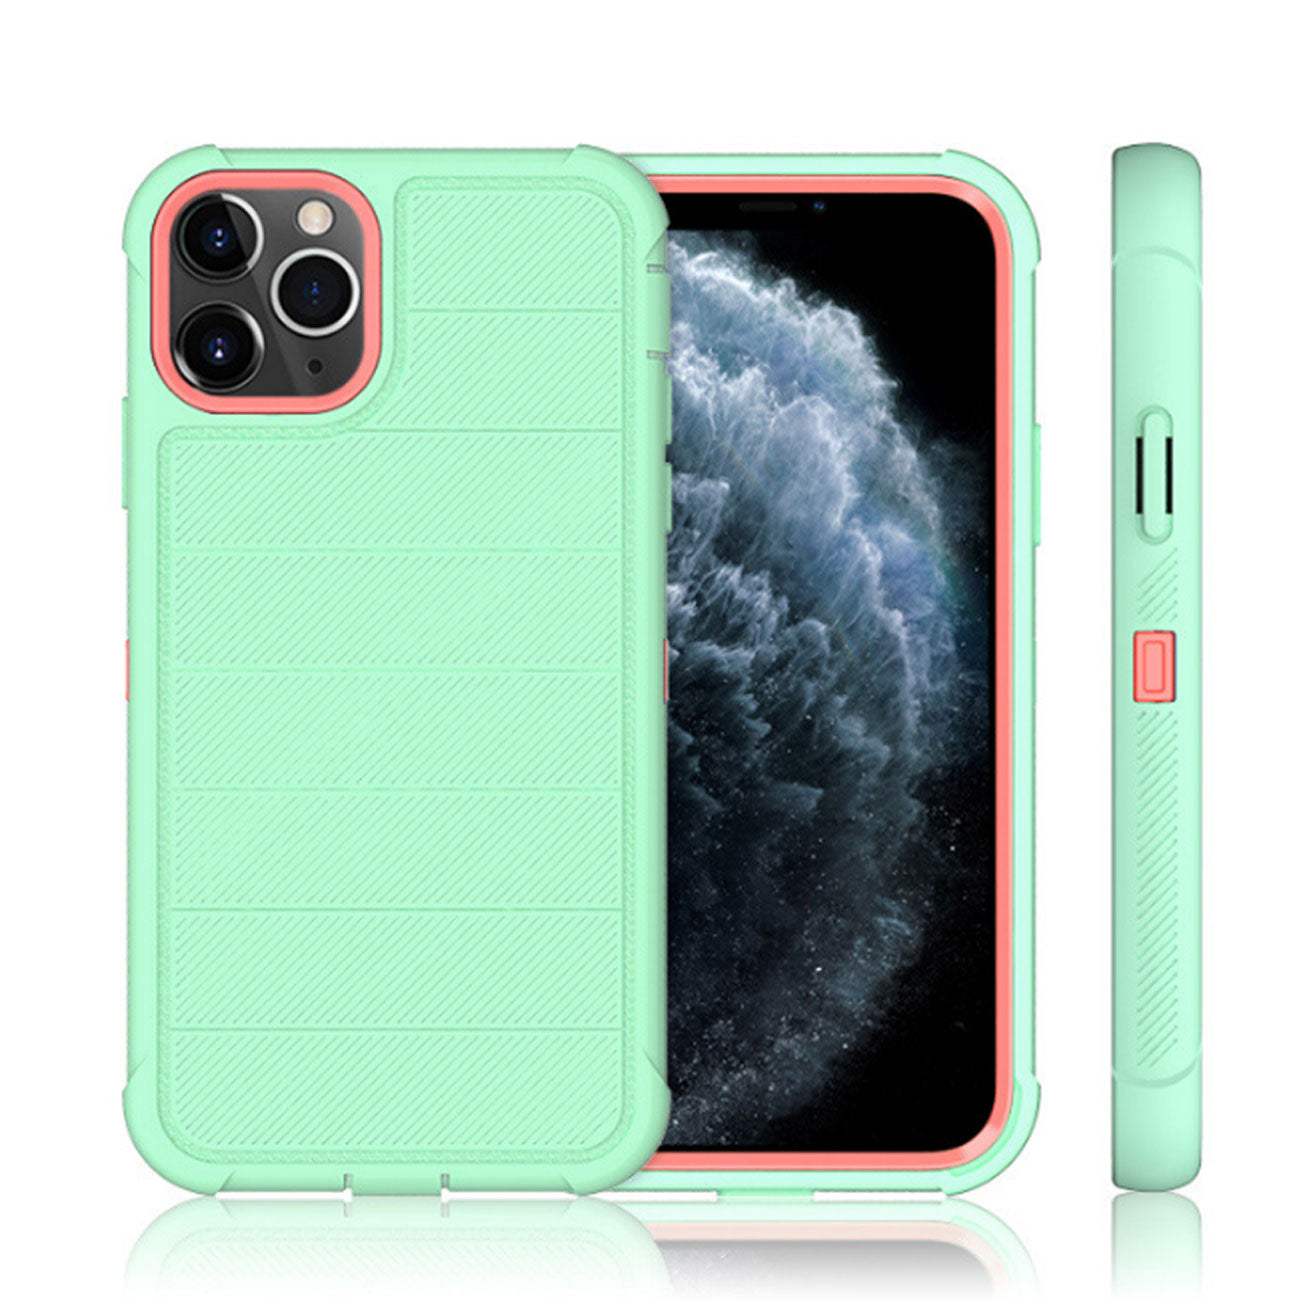 3-In-1 Hybrid Heavy Duty Holster Combo Case For APPLE IPHONE 11 PRO In Green